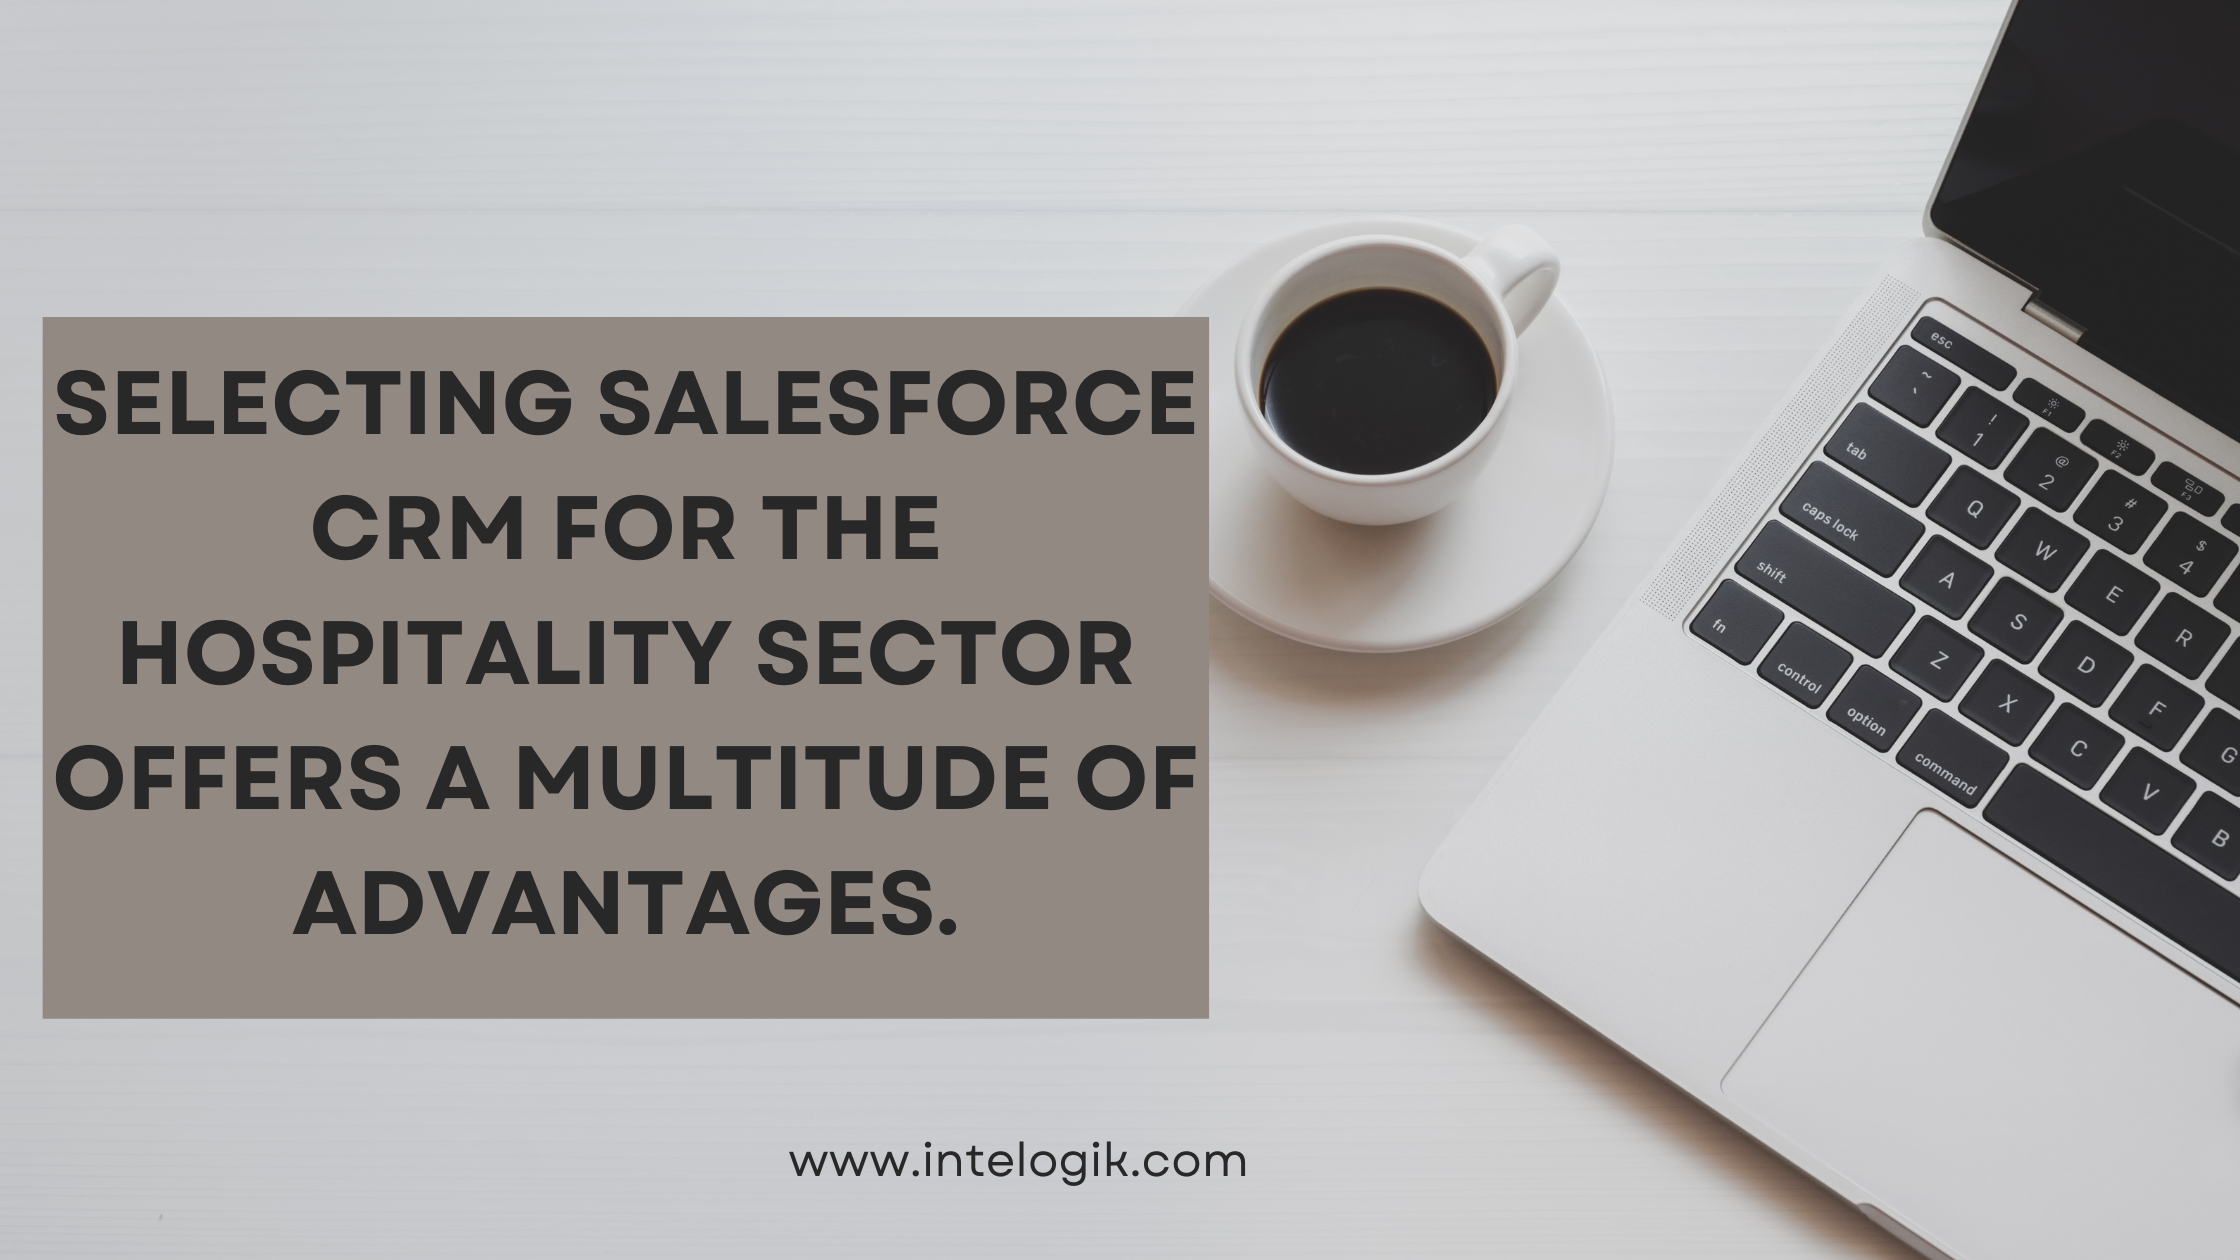 Selecting Salesforce CRM for the hospitality sector offers a multitude of advantages.